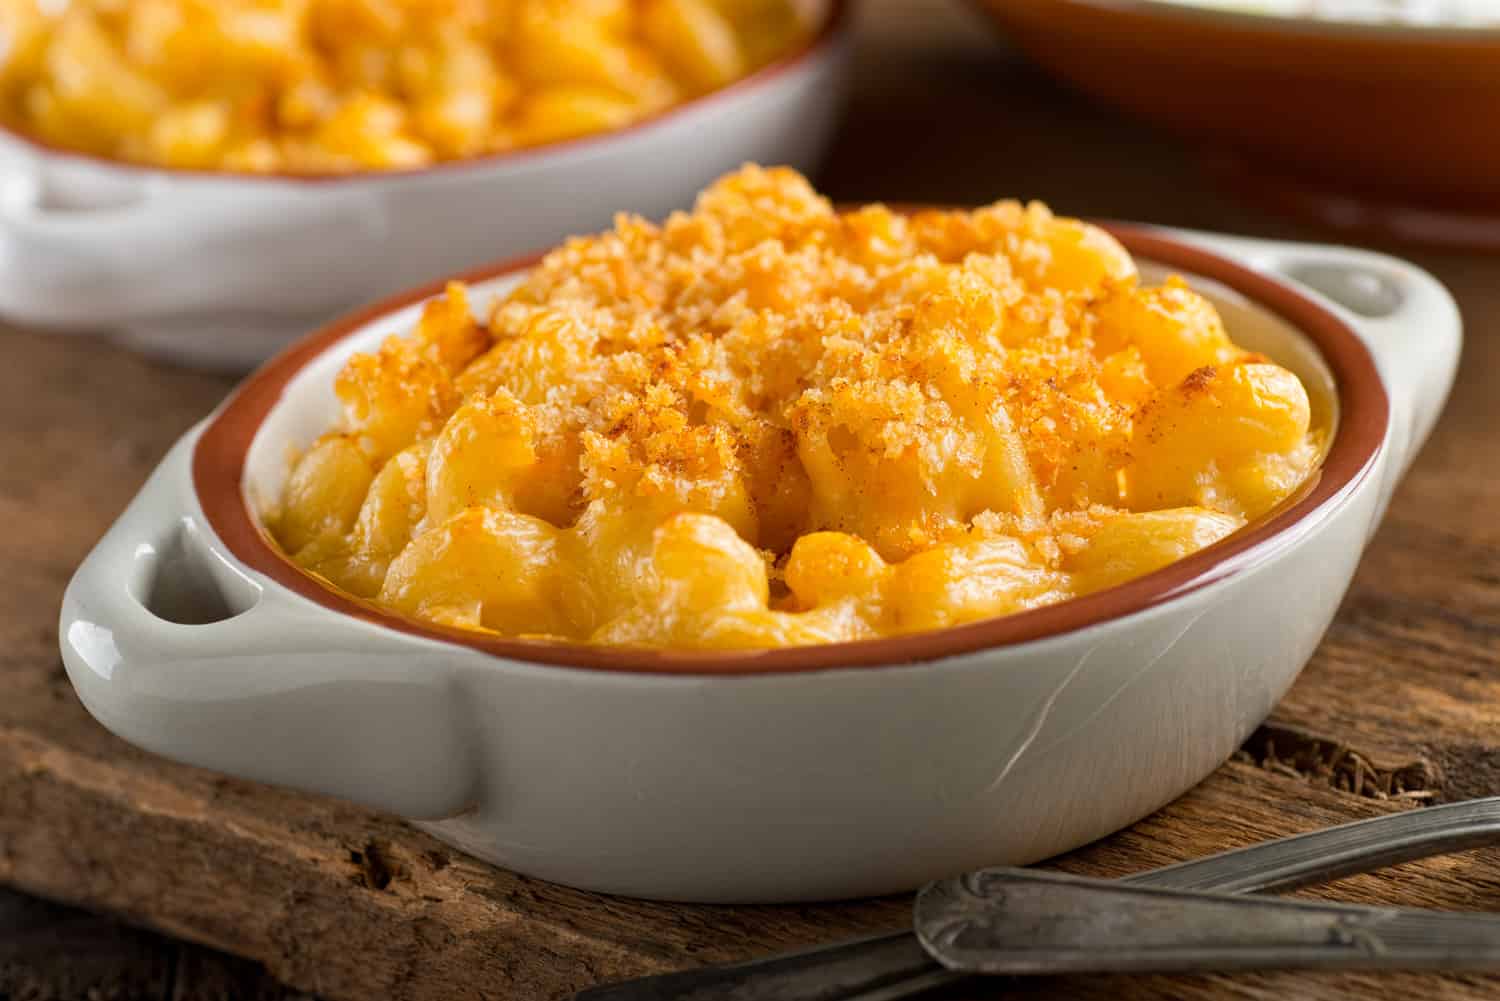 A bowl of delicious homemade mac and cheese.